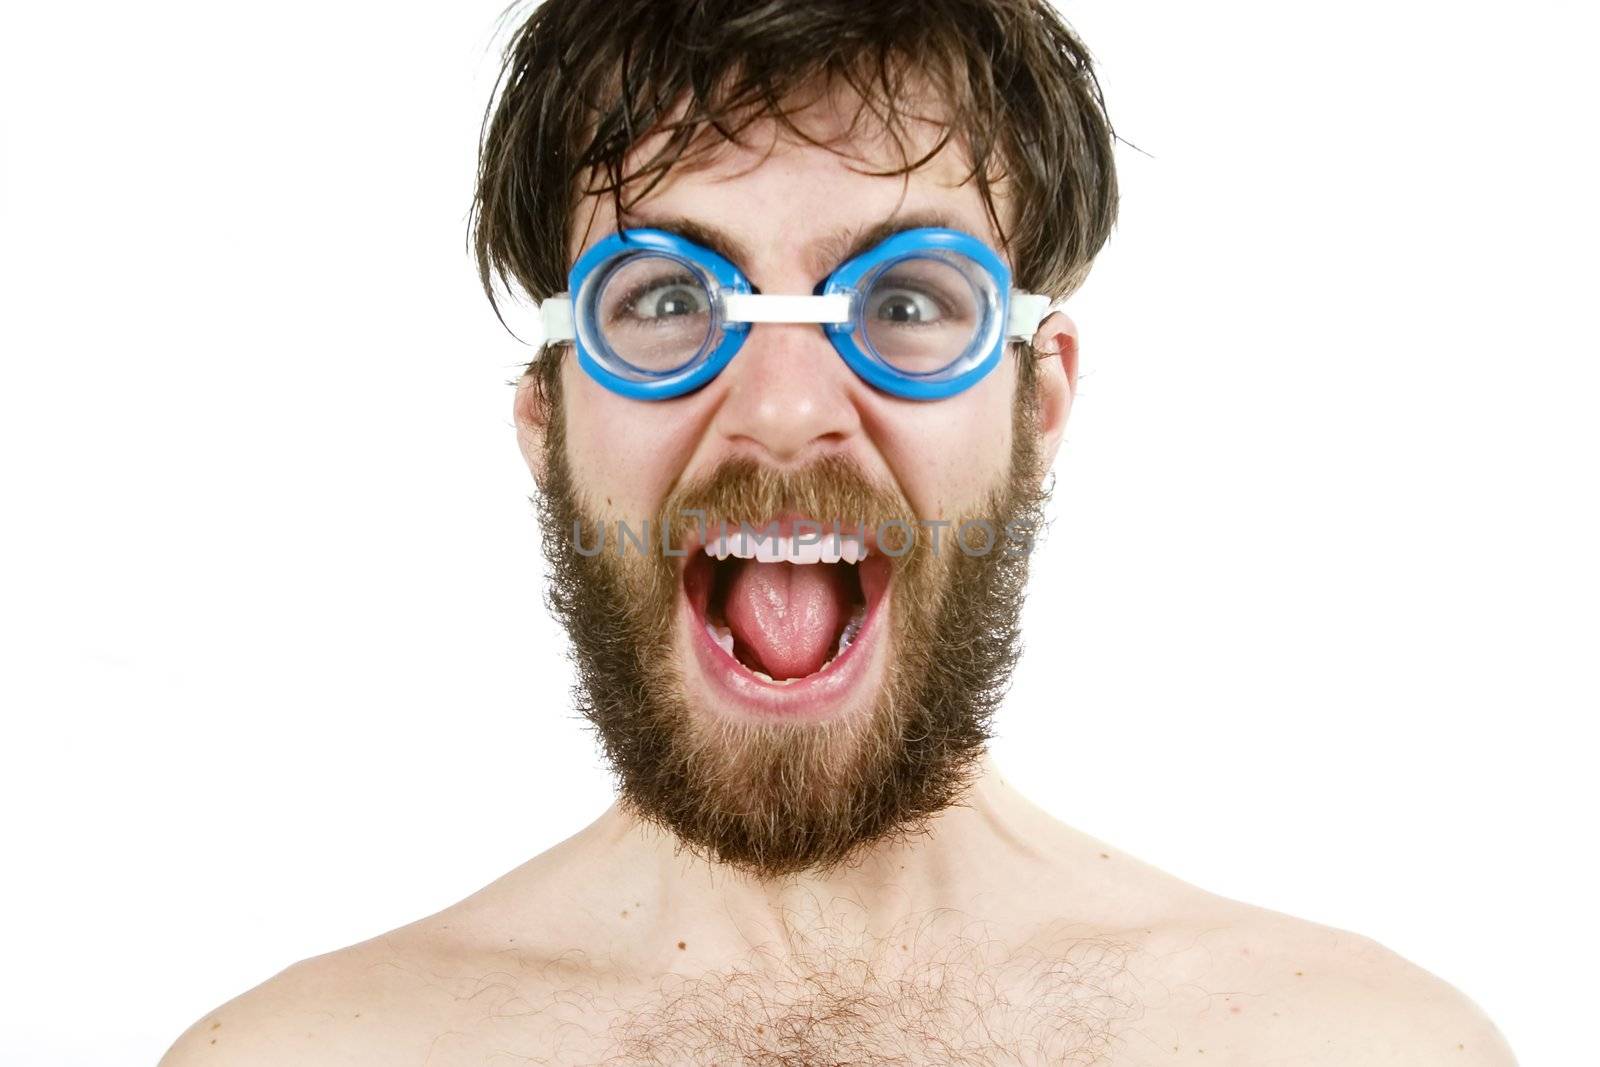 A humorous image of a young bearded male wearing swimming goggles, yelling.